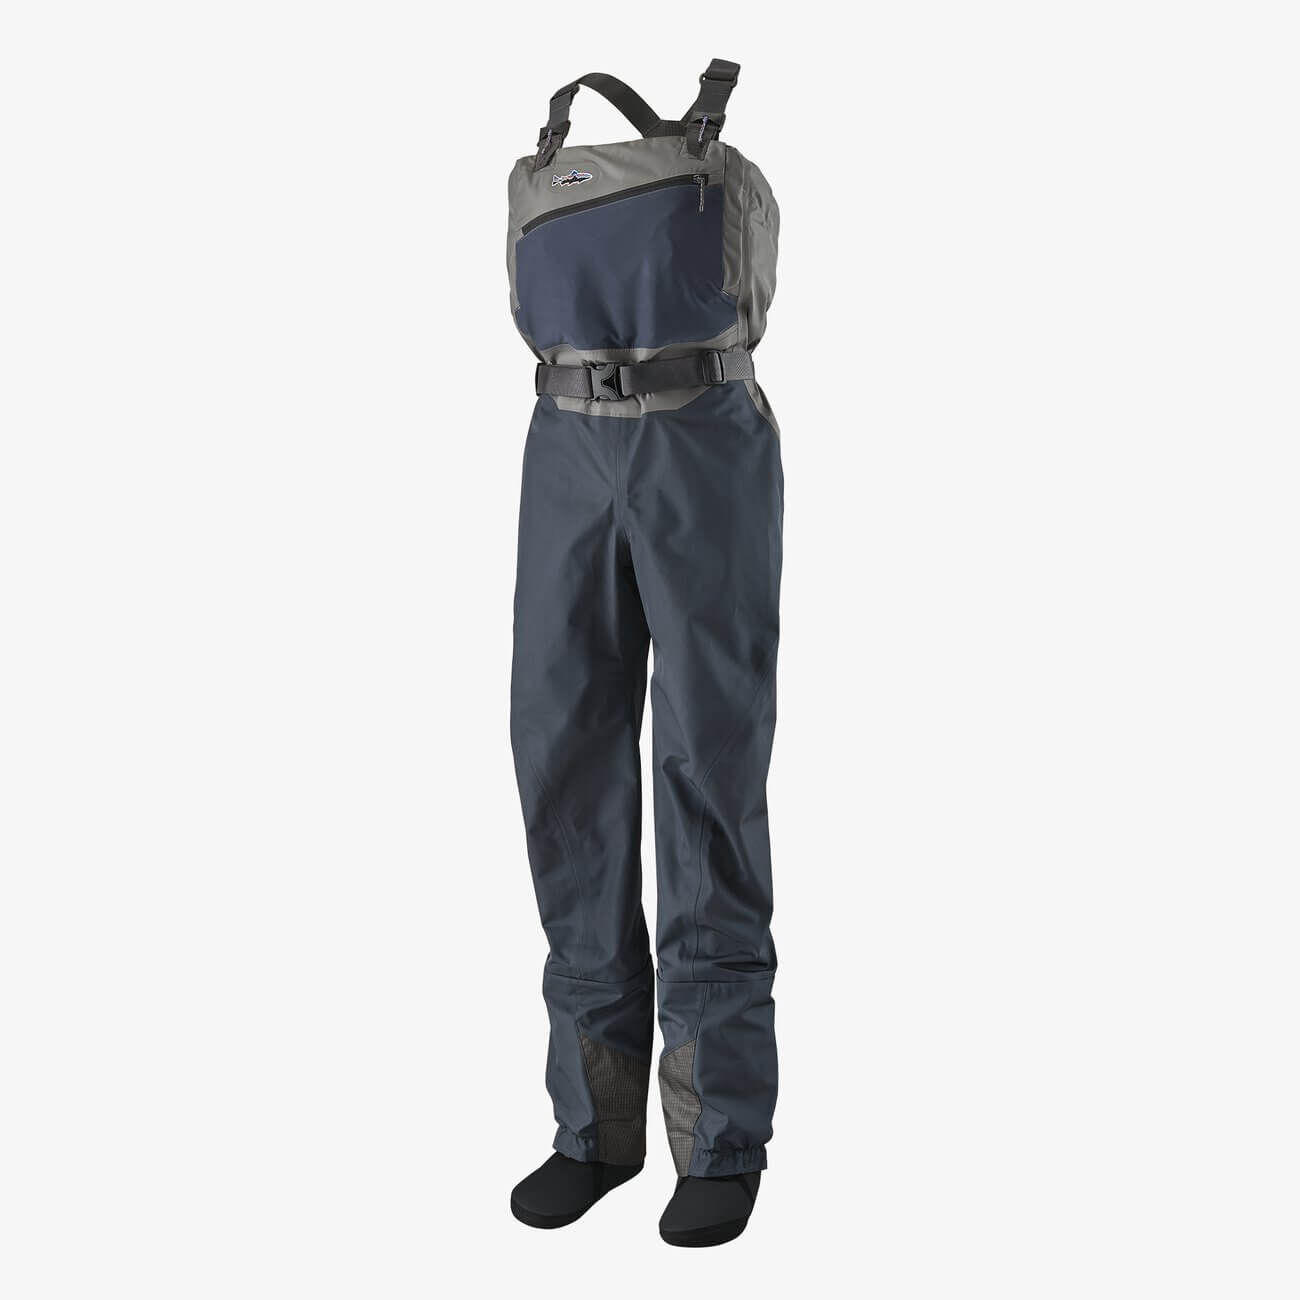 Patagonia Women's Swiftcurrent Waders 2020